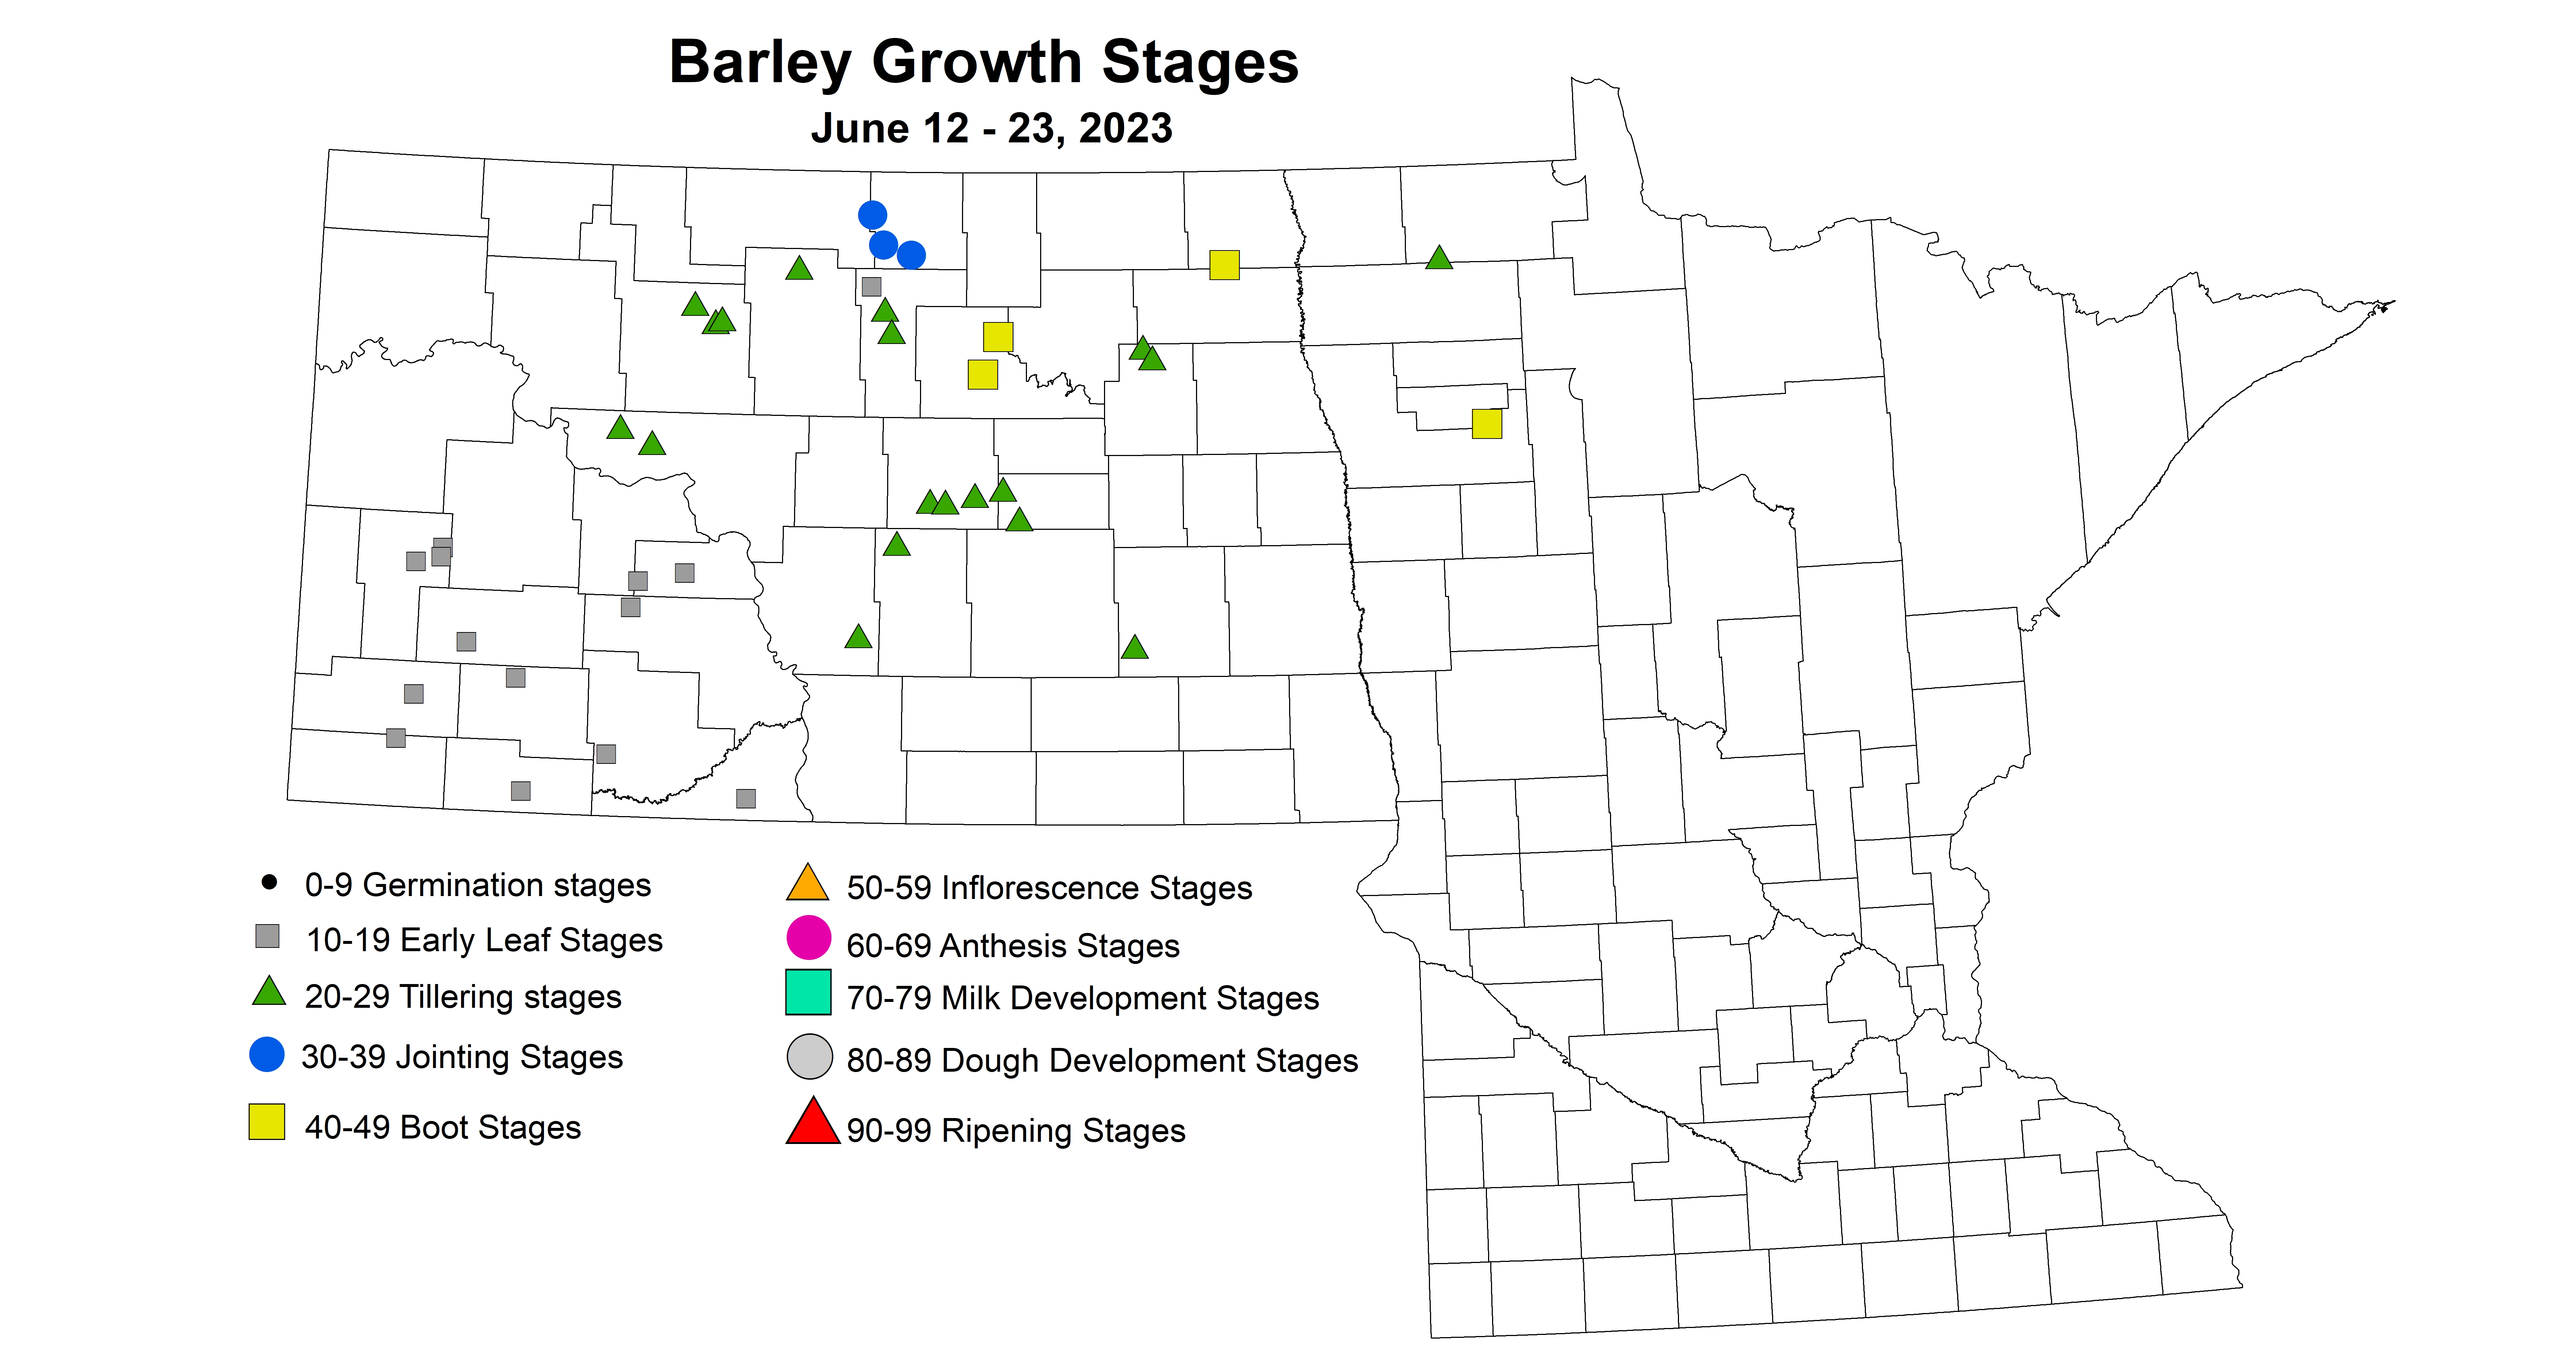 barley growth stages June 12-23 2023 updated